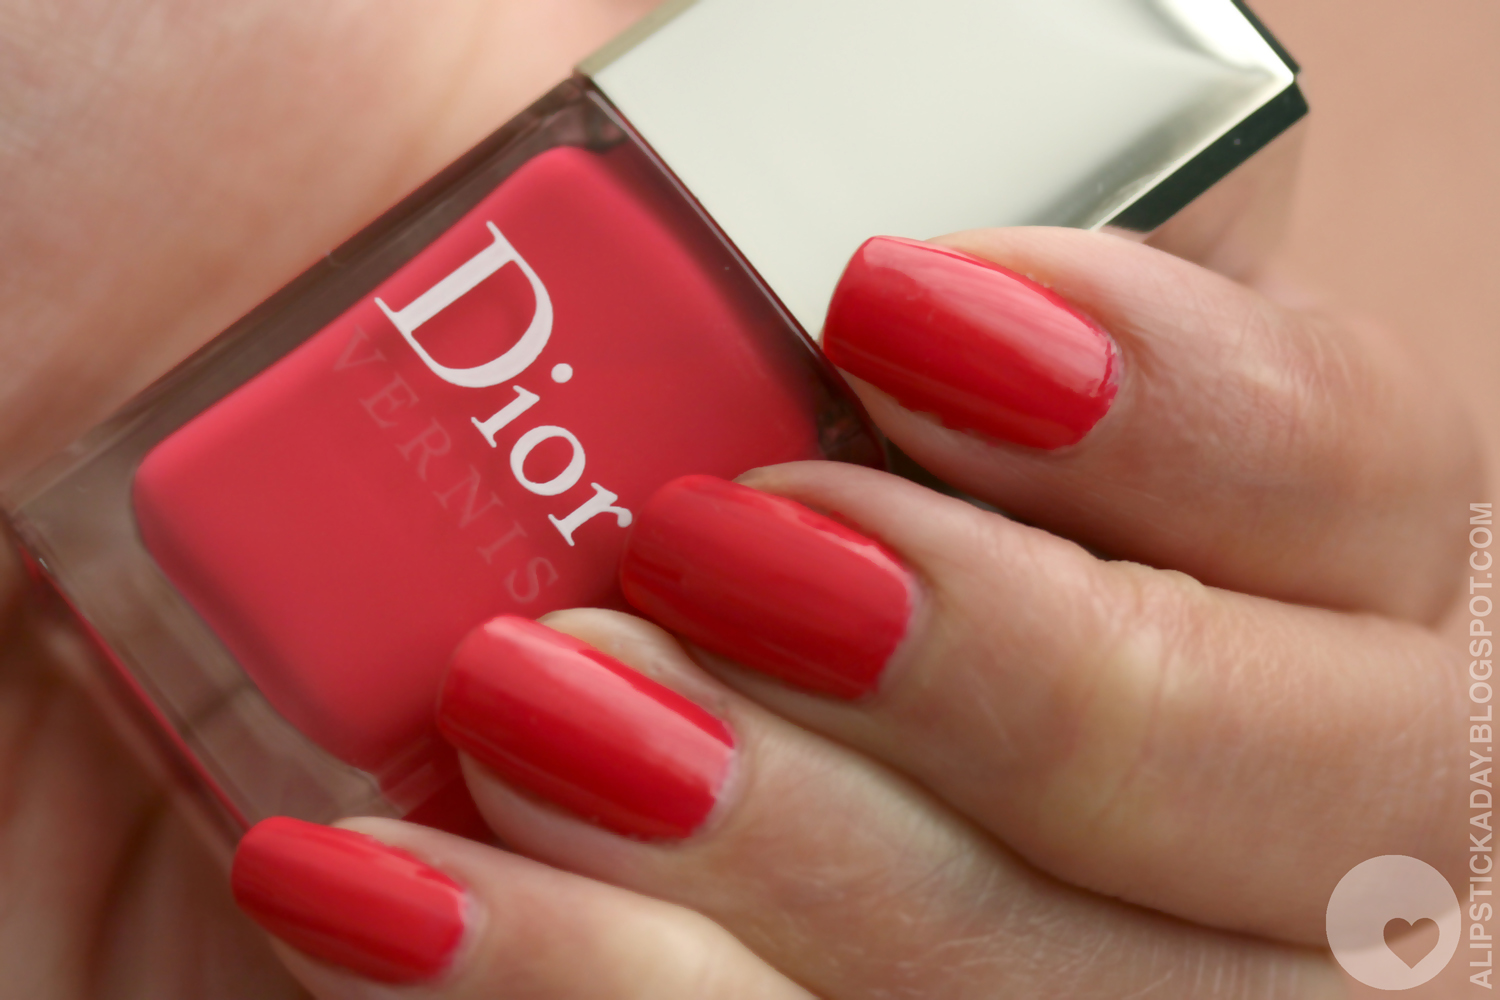 1. Dior Vernis Nail Polish in "Lucky" - wide 6